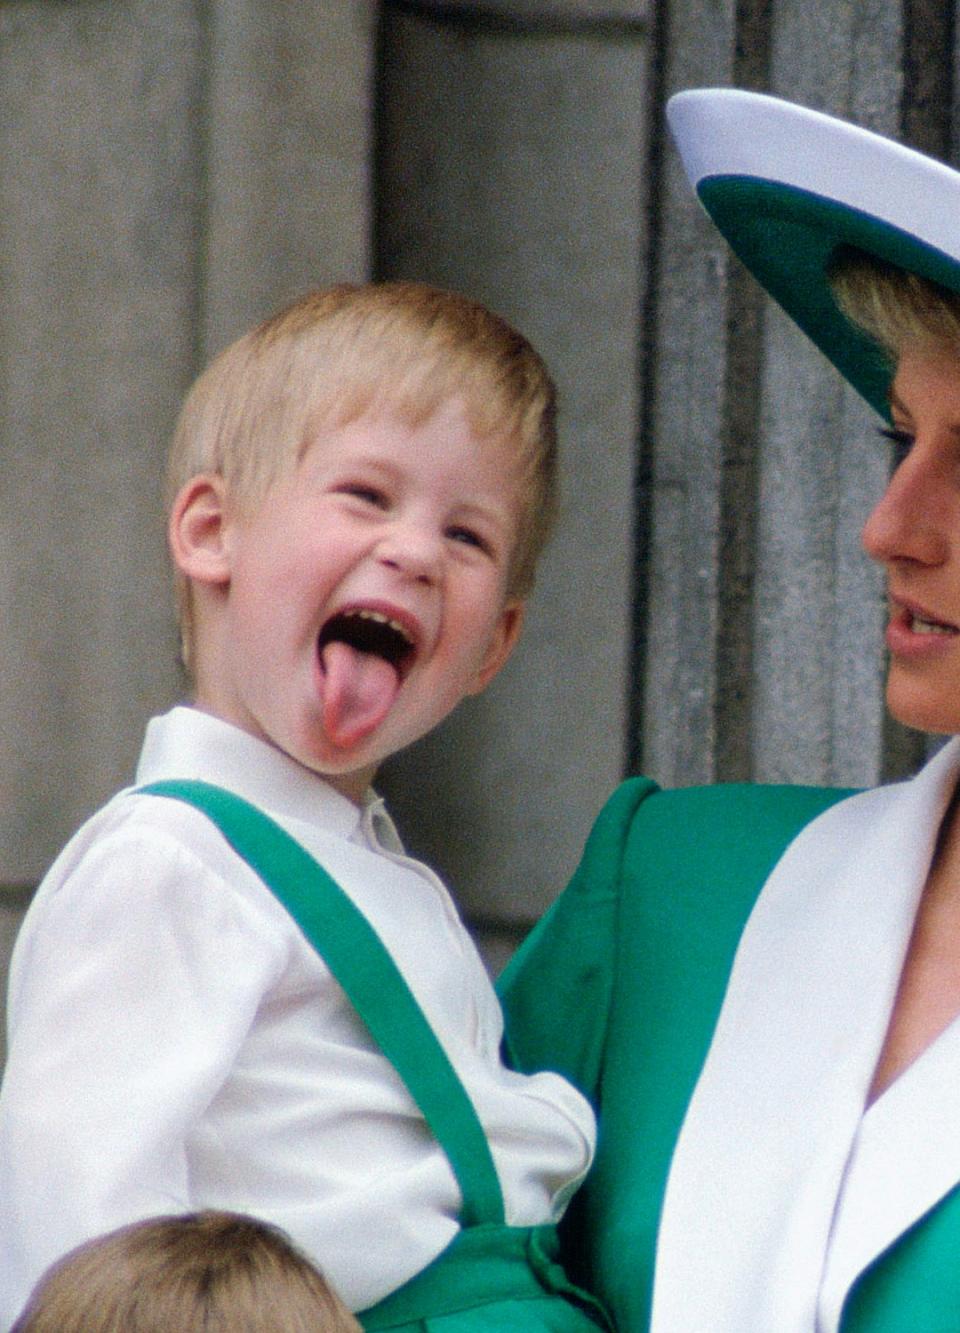 Prince Harry sticks his tongue out on the balcony of Buckingham Palace